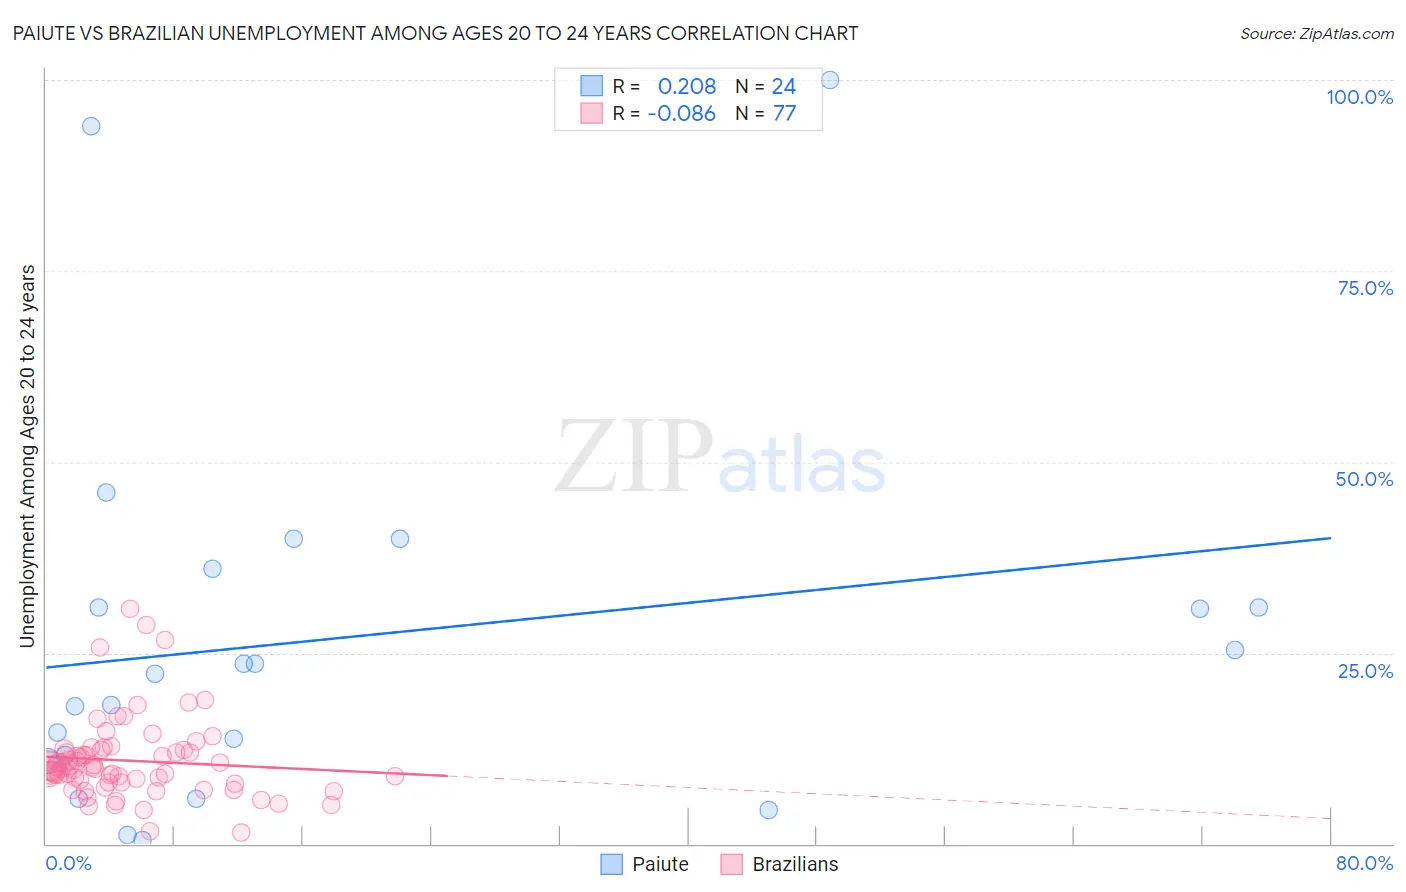 Paiute vs Brazilian Unemployment Among Ages 20 to 24 years